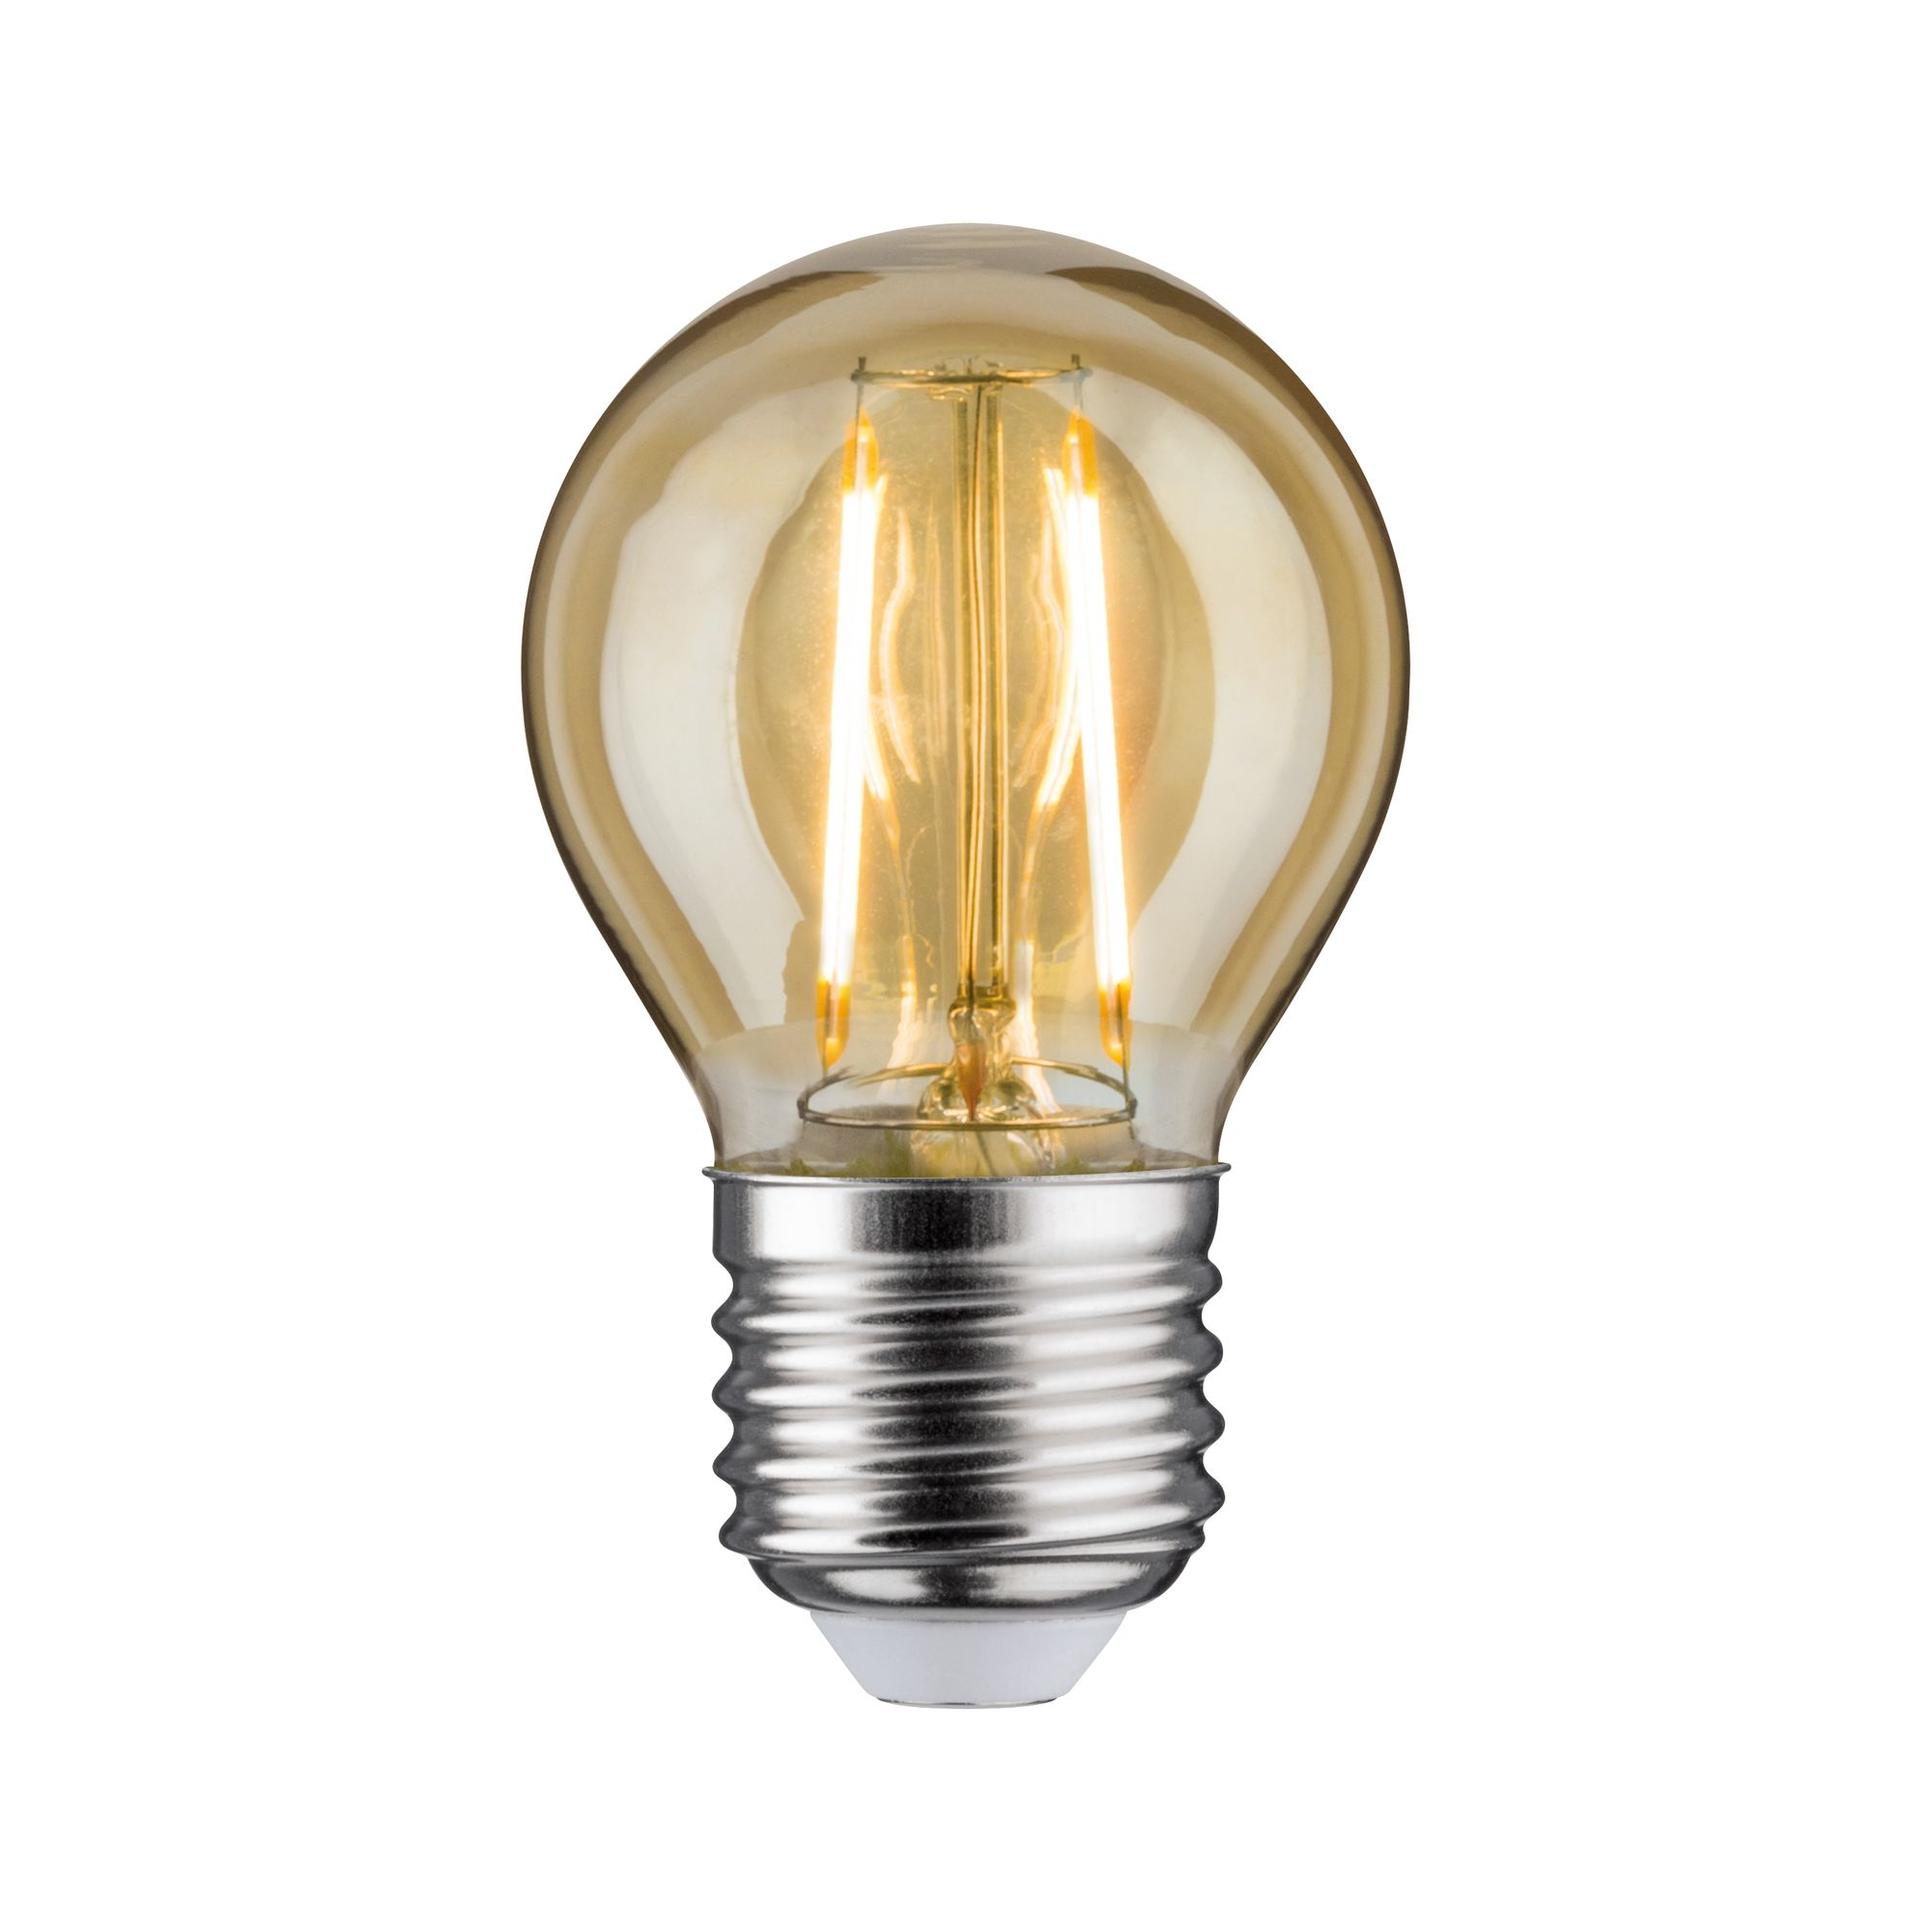 LED-Tropfenlampe E27 4,7W (37W) 430 lm warmgold + product picture